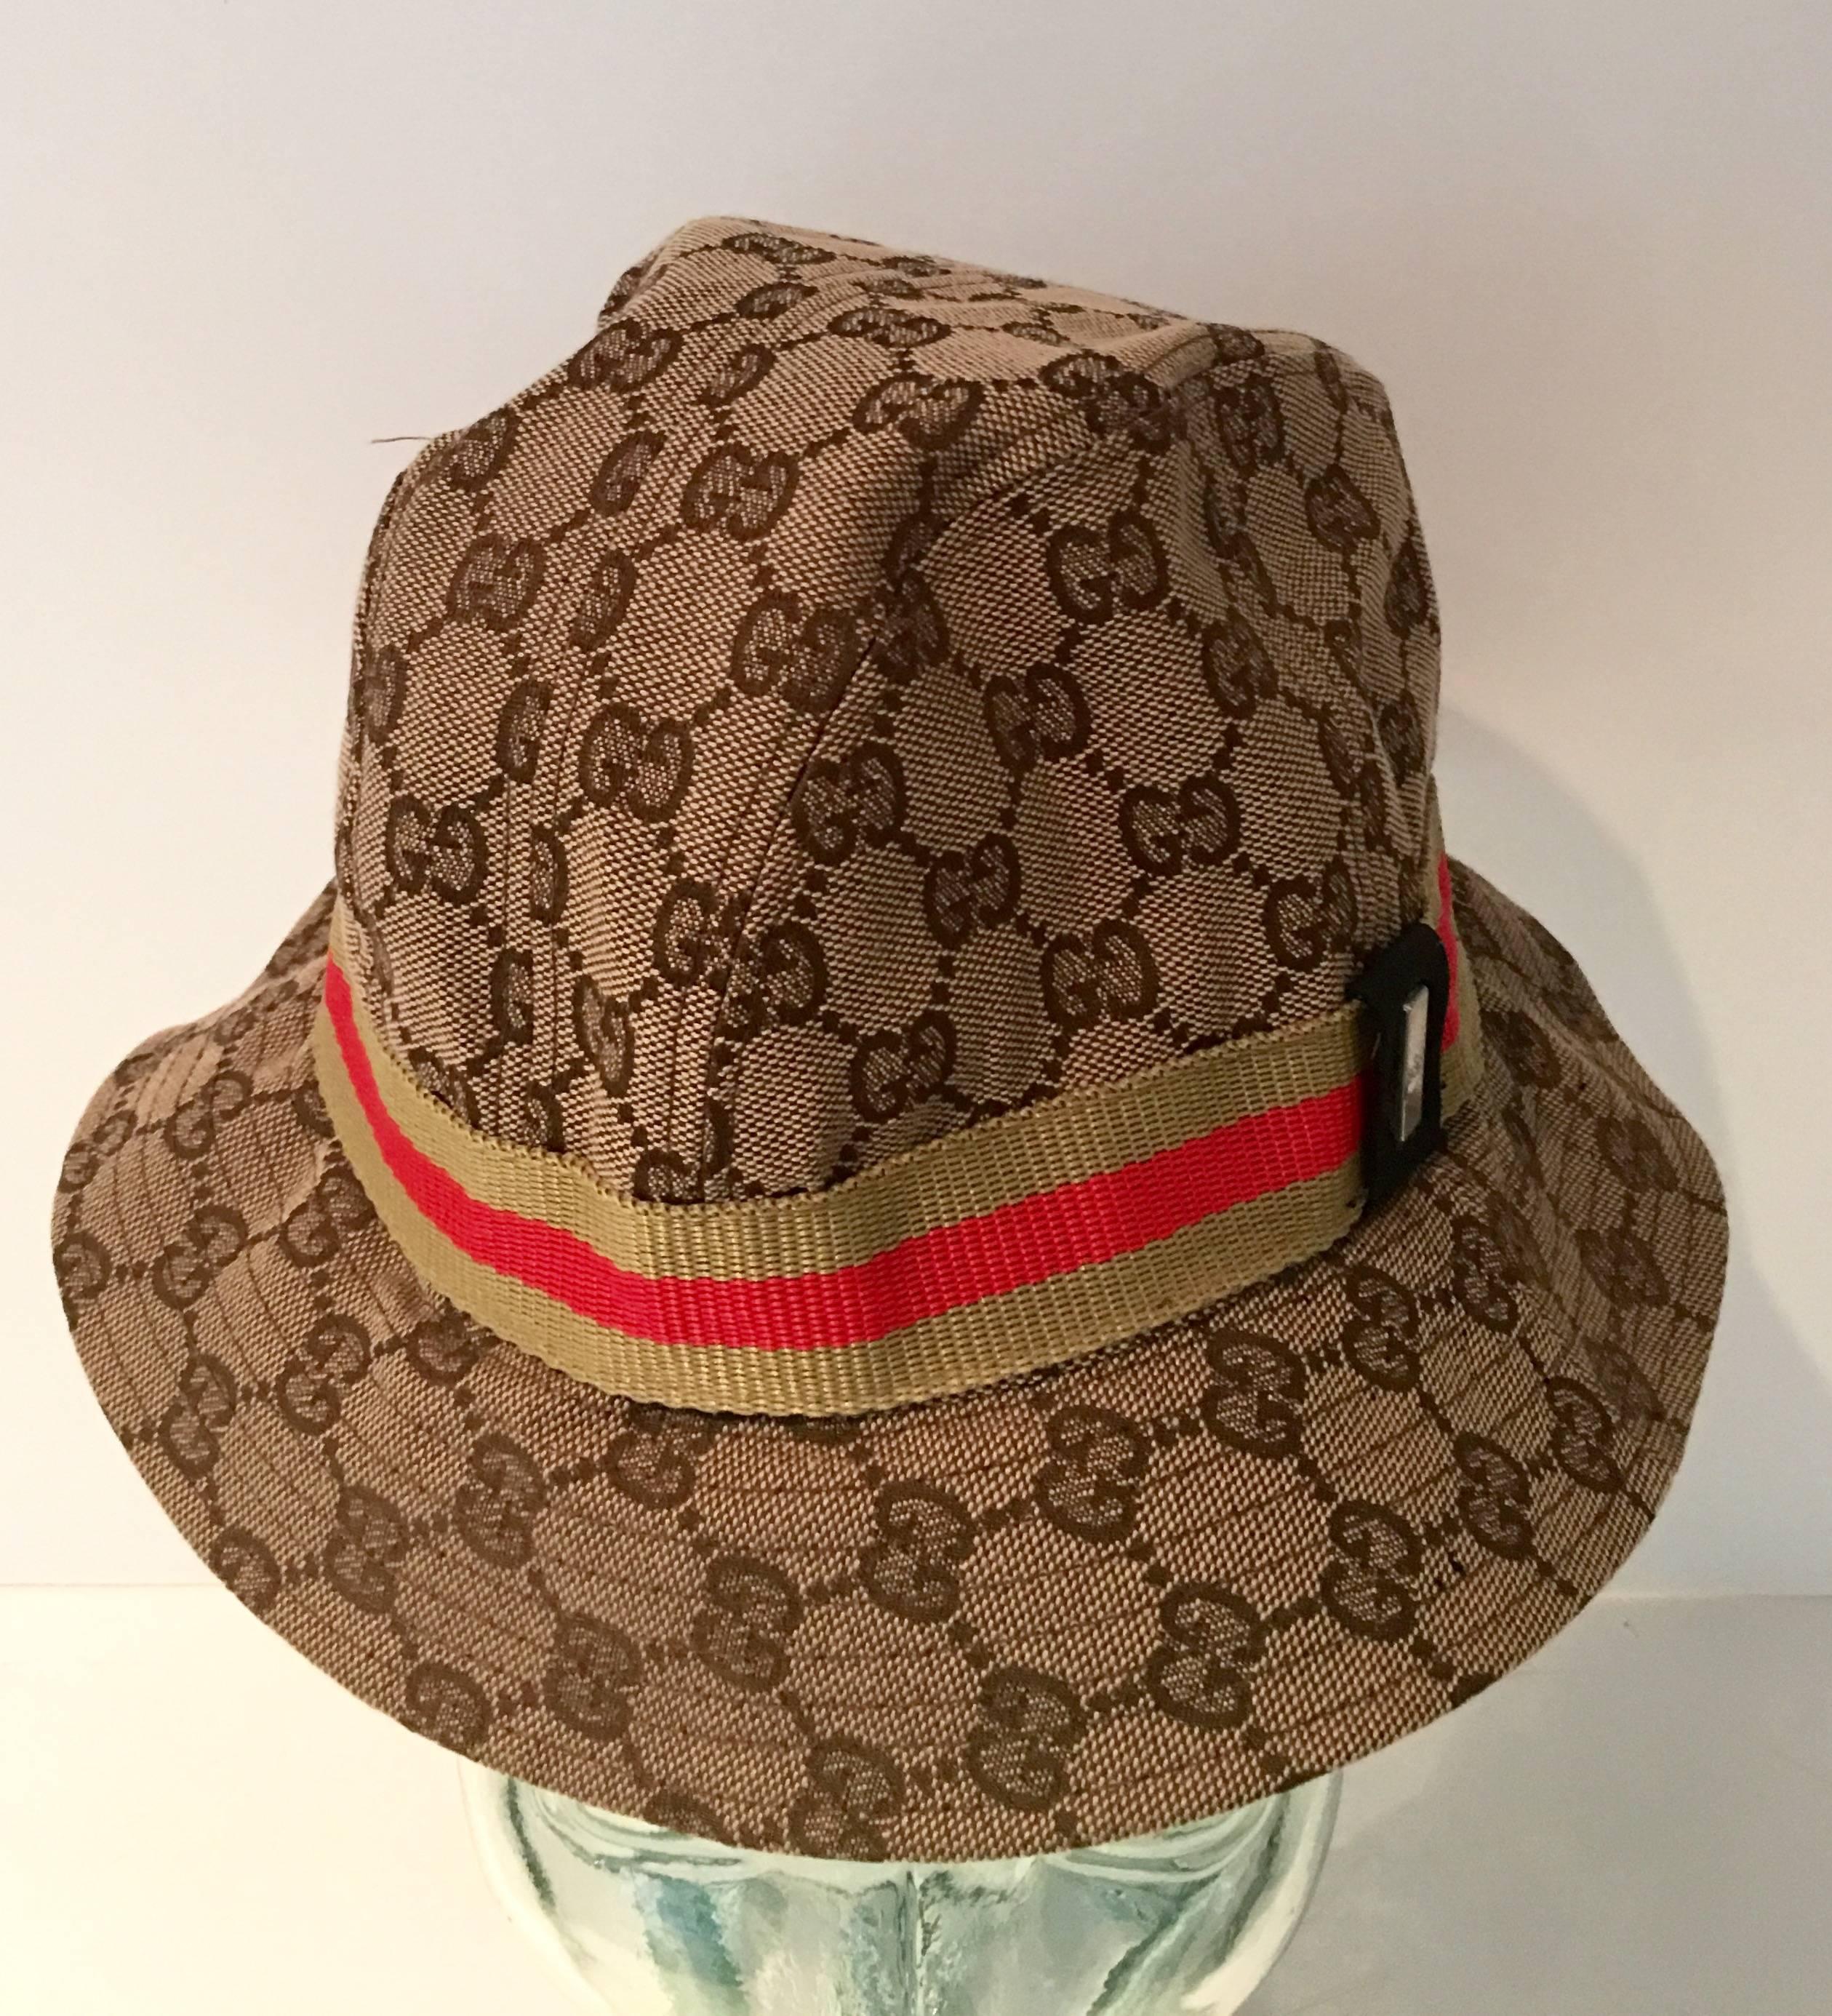 This iconic floppy fedora hat made in Italy by, Gucci is tan canvas with a khaki and bright red stripe band and silver tone Gucci log tag detail set on black fabric. Gucci label intact, children's size large or female adult size small. Interior size